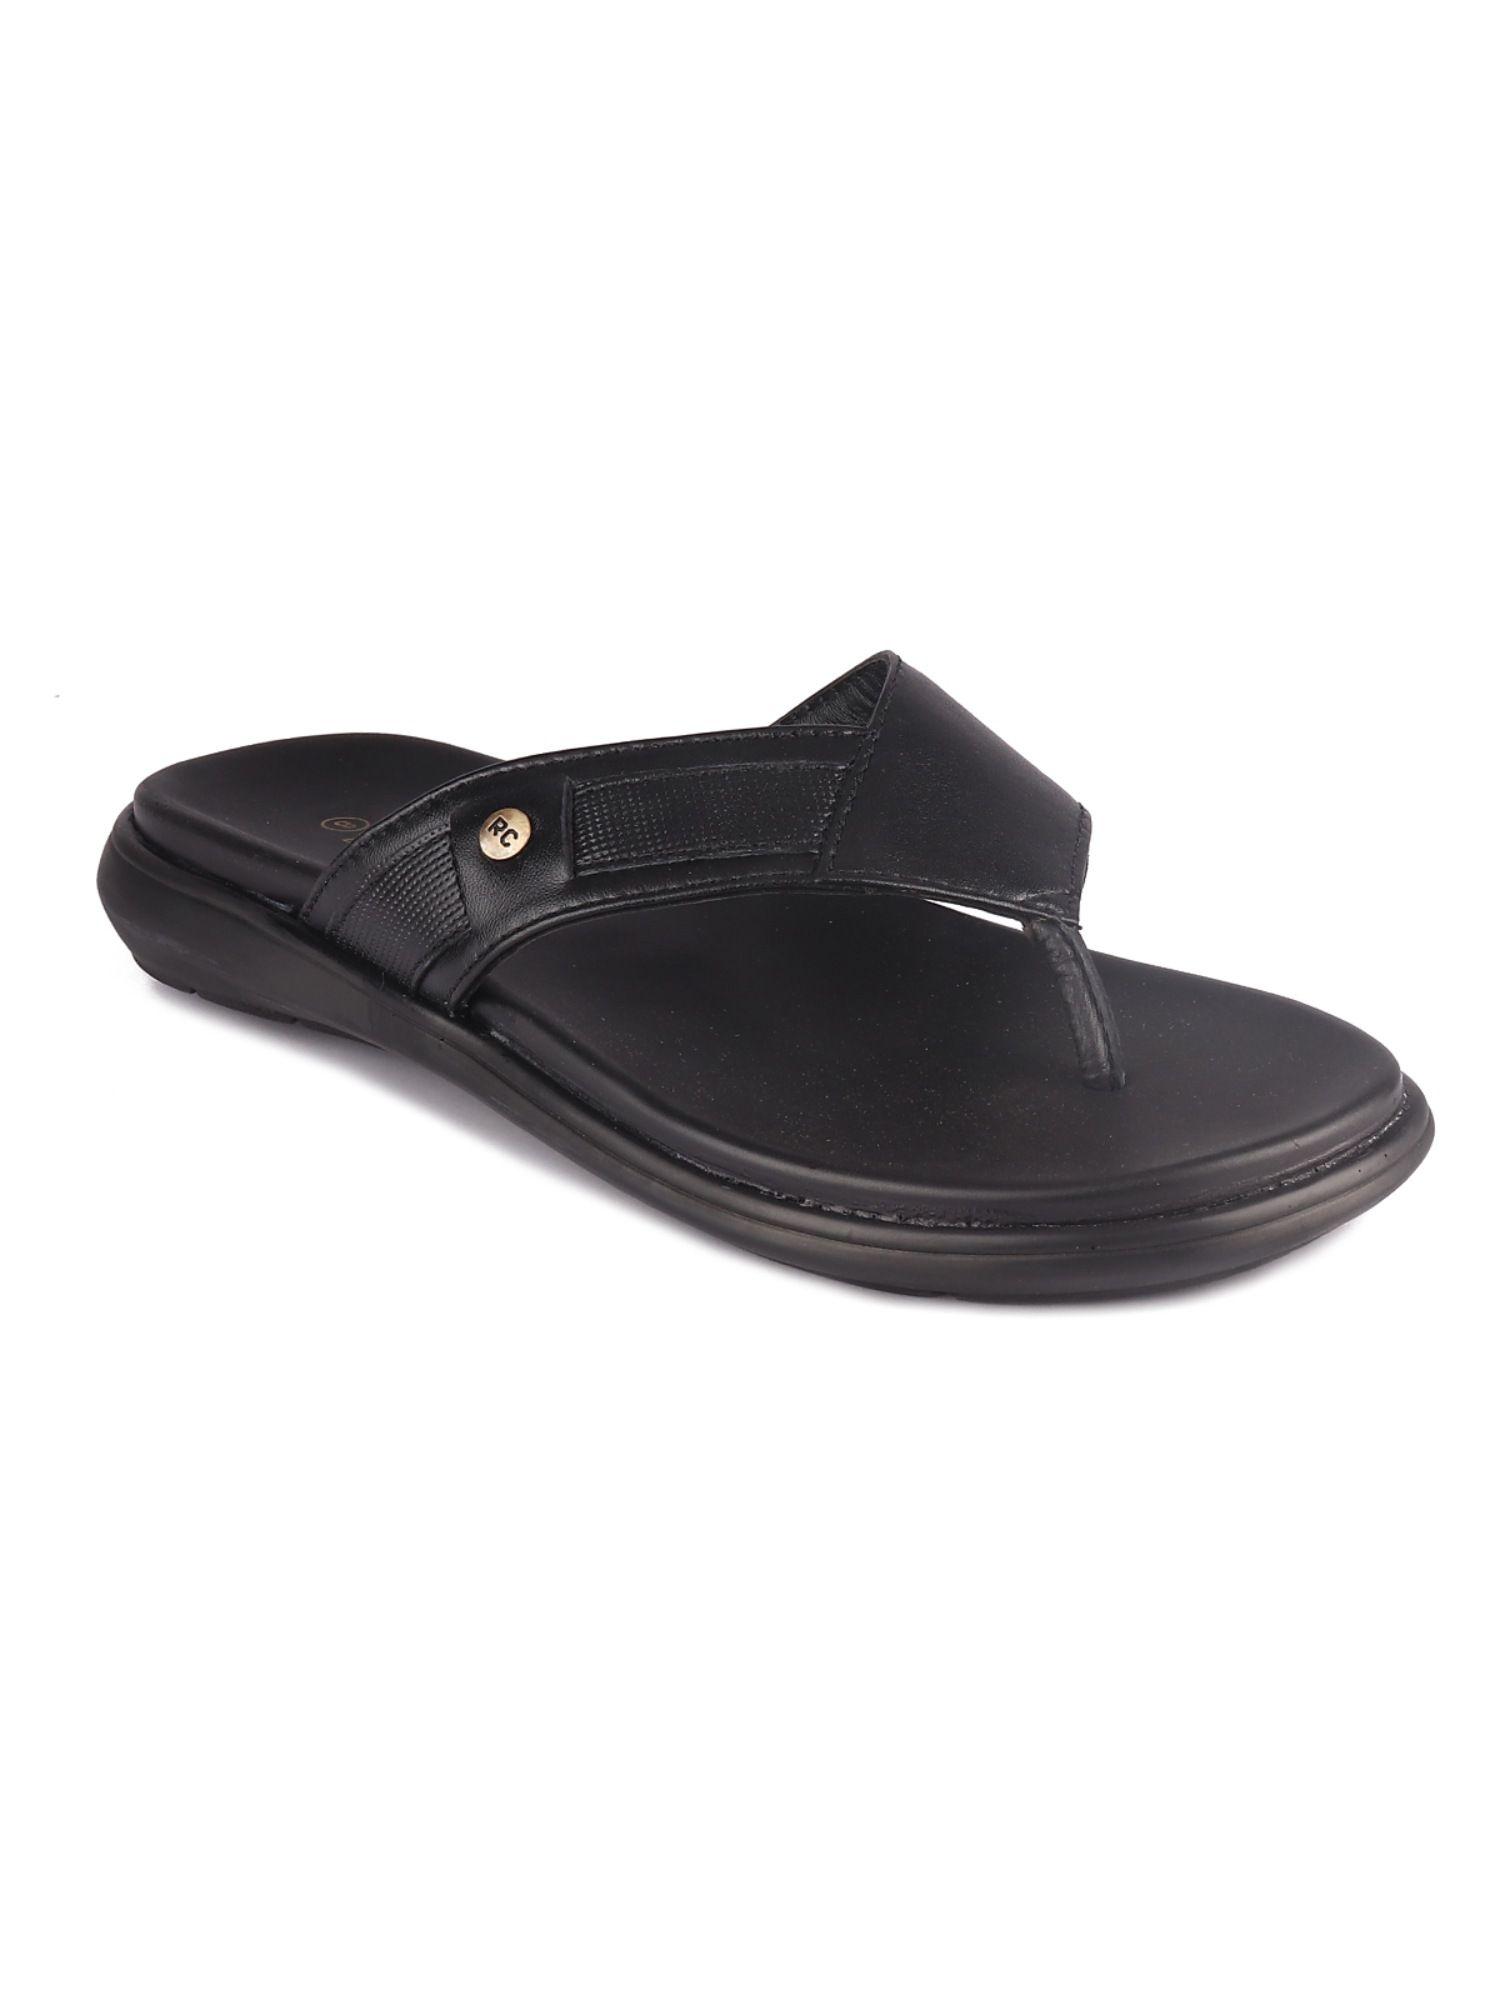 black leather casual solid slipper for men